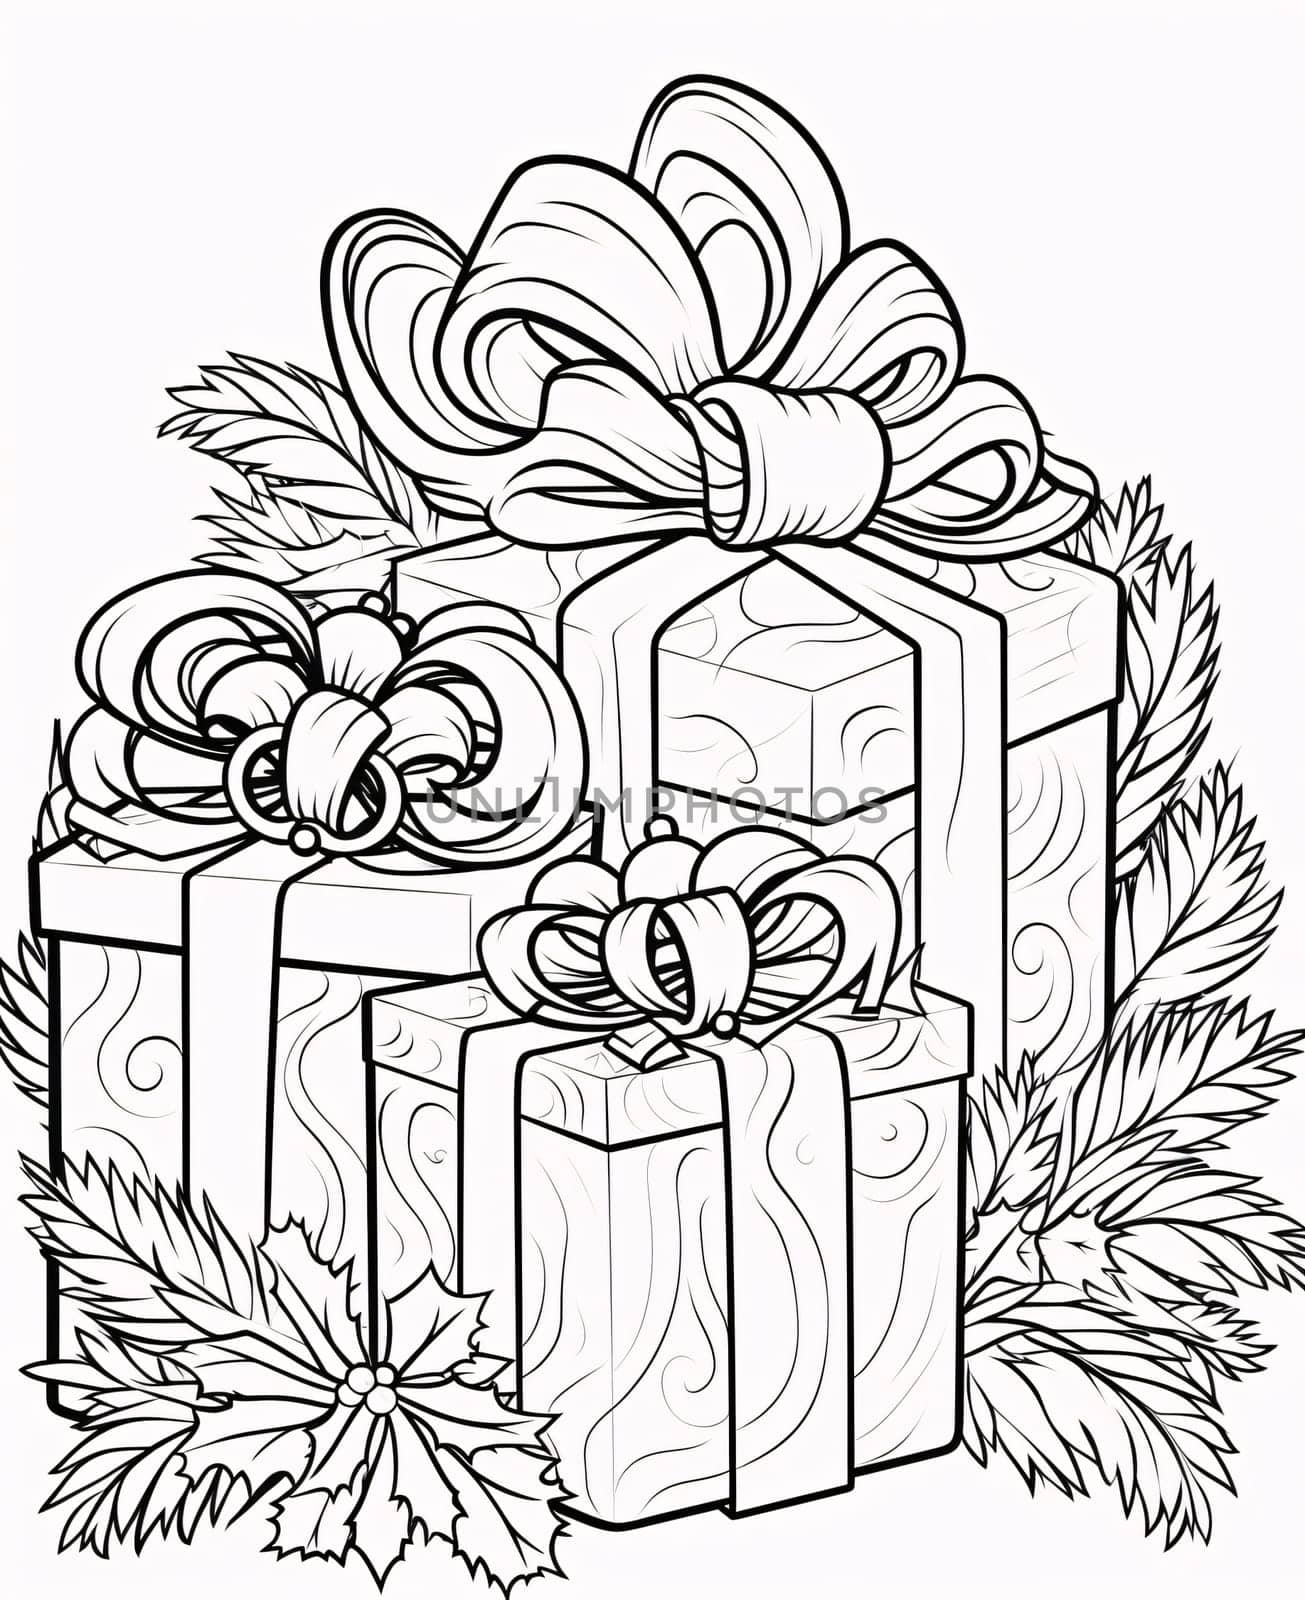 Black and White card with coloring pages, gifts boxes with bows. Gifts as a day symbol of present and love. A time of falling in love and love.